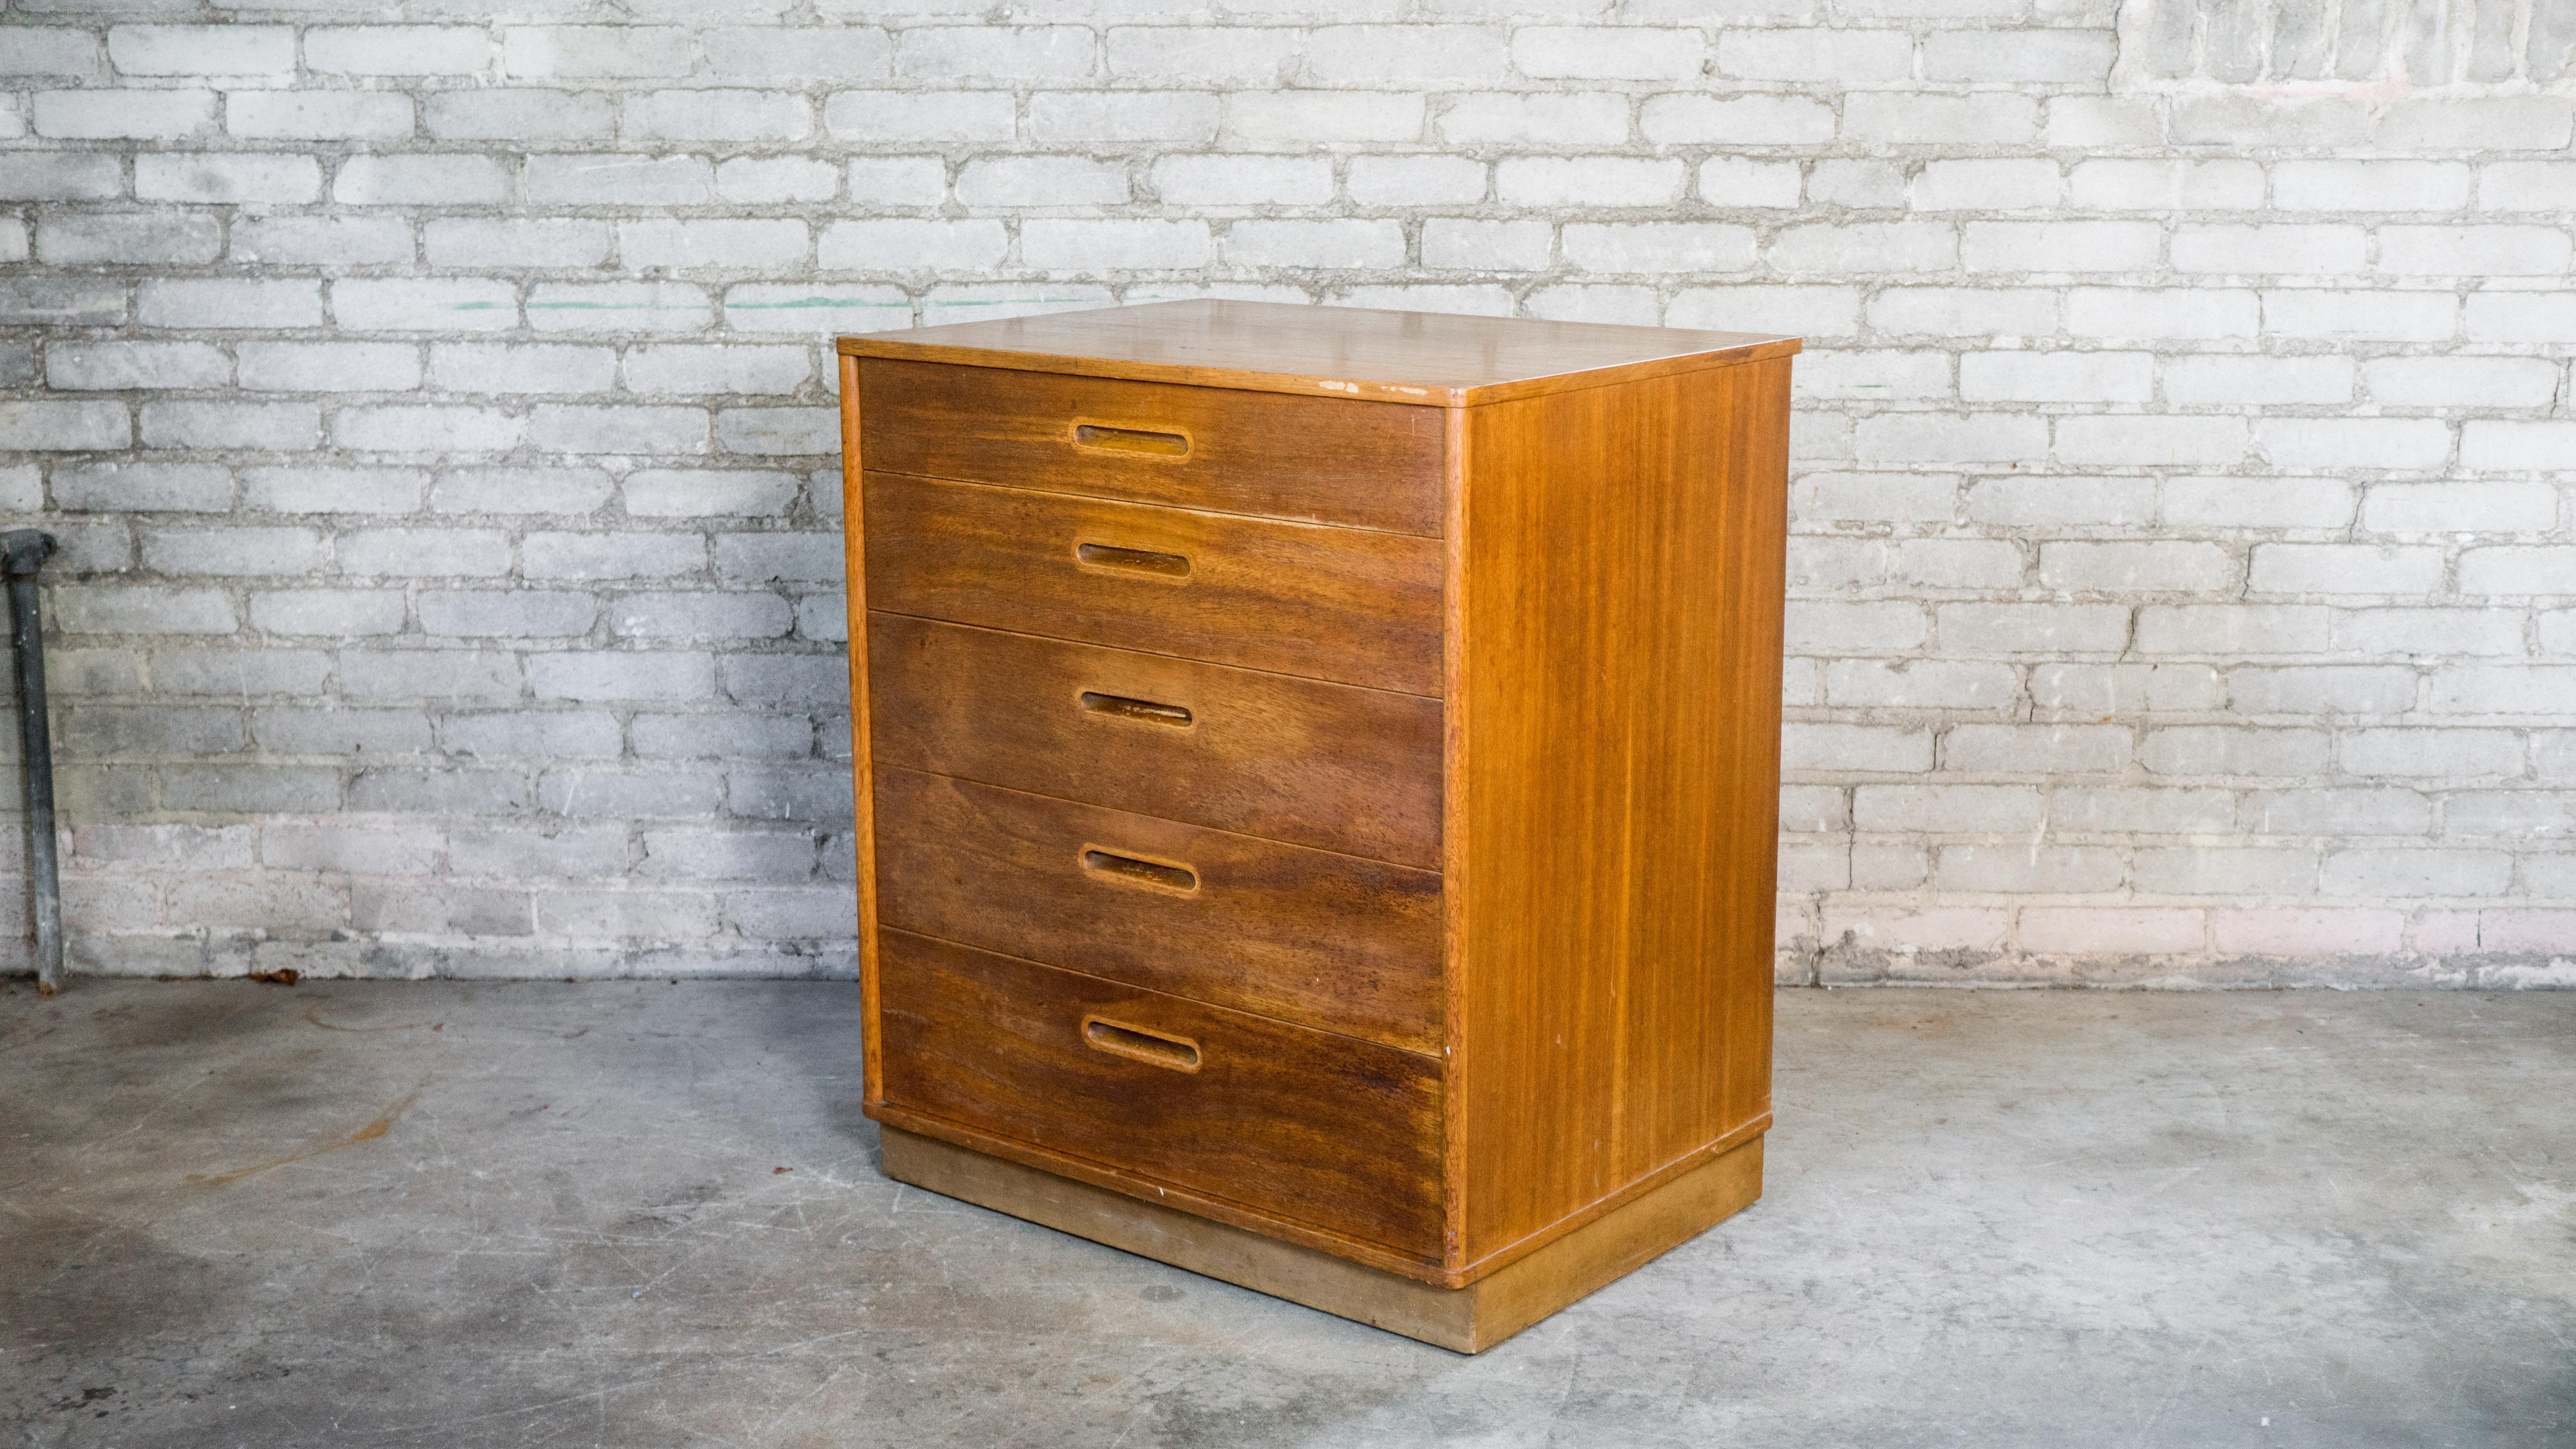 Edward Wormely for Dunbar dresser, circa 1950s. Presented in mahogany, showing lovely woodgrain details. Five drawers with dovetail joints. Perfect smaller size. Leather wrapped plinth base. Beautiful craftsmanship. Good vintage condition.